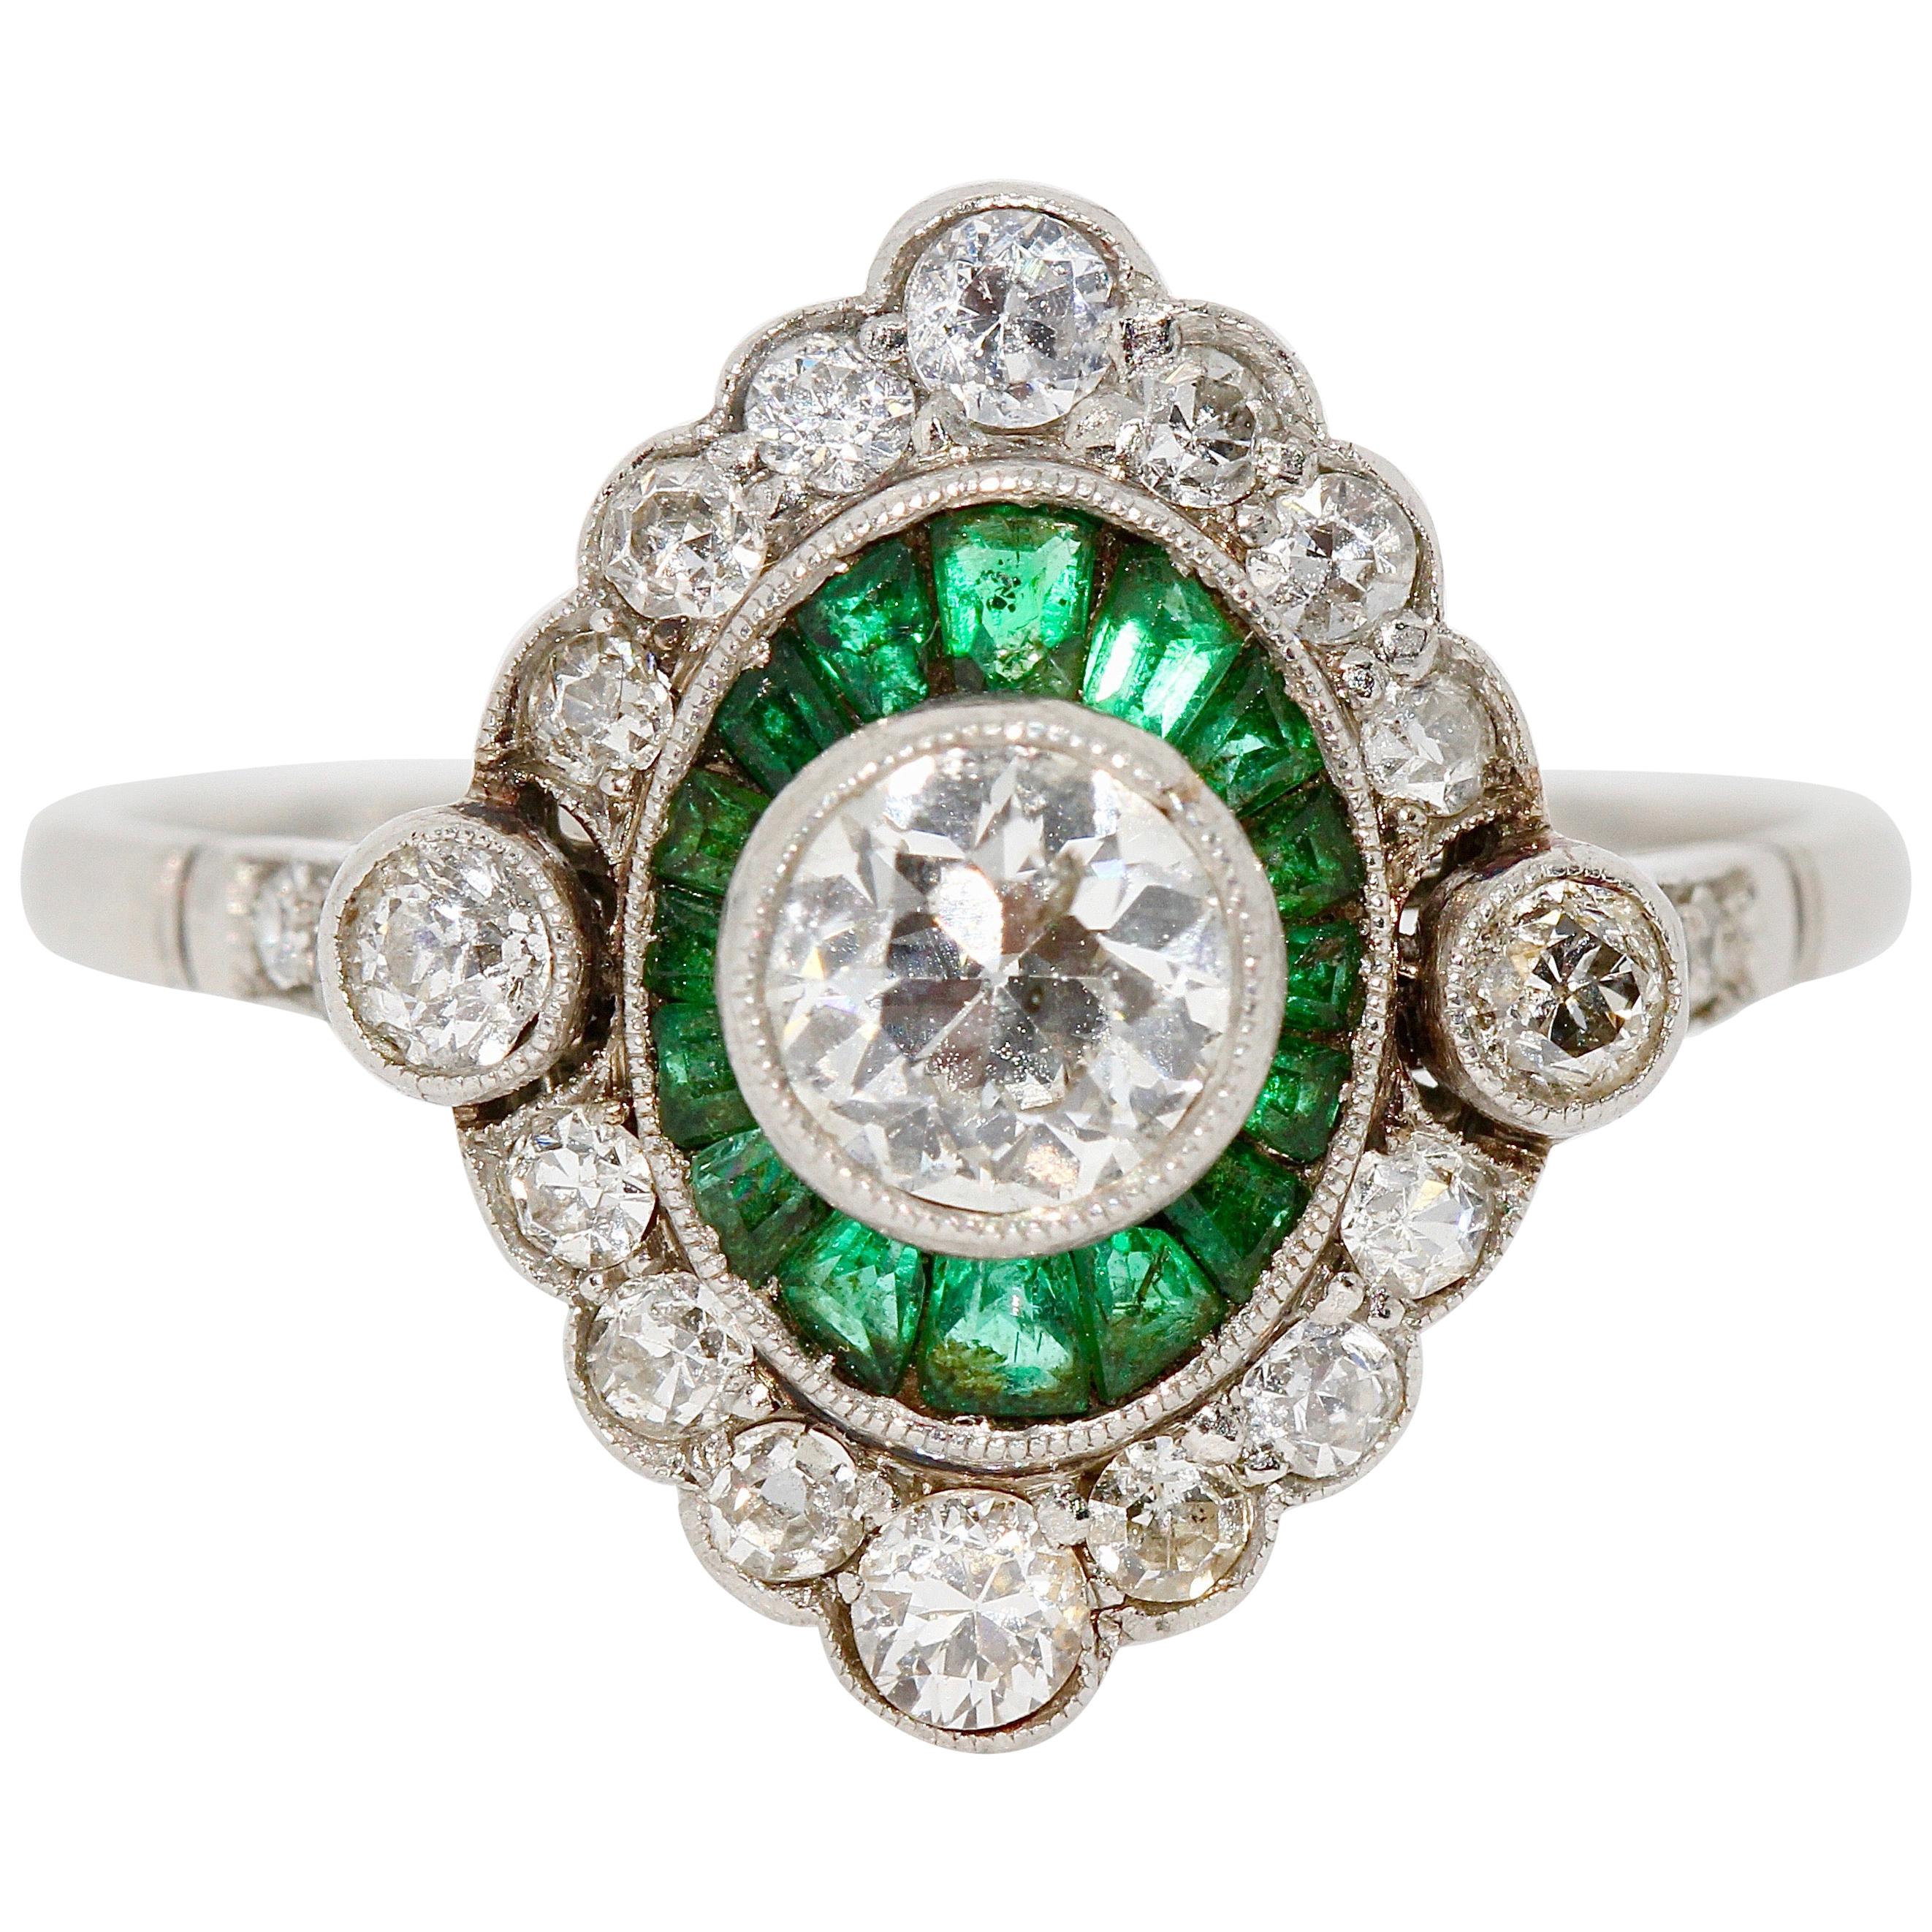 Antique Ladies Art Deco Style Gold Ring with Diamonds and Emeralds